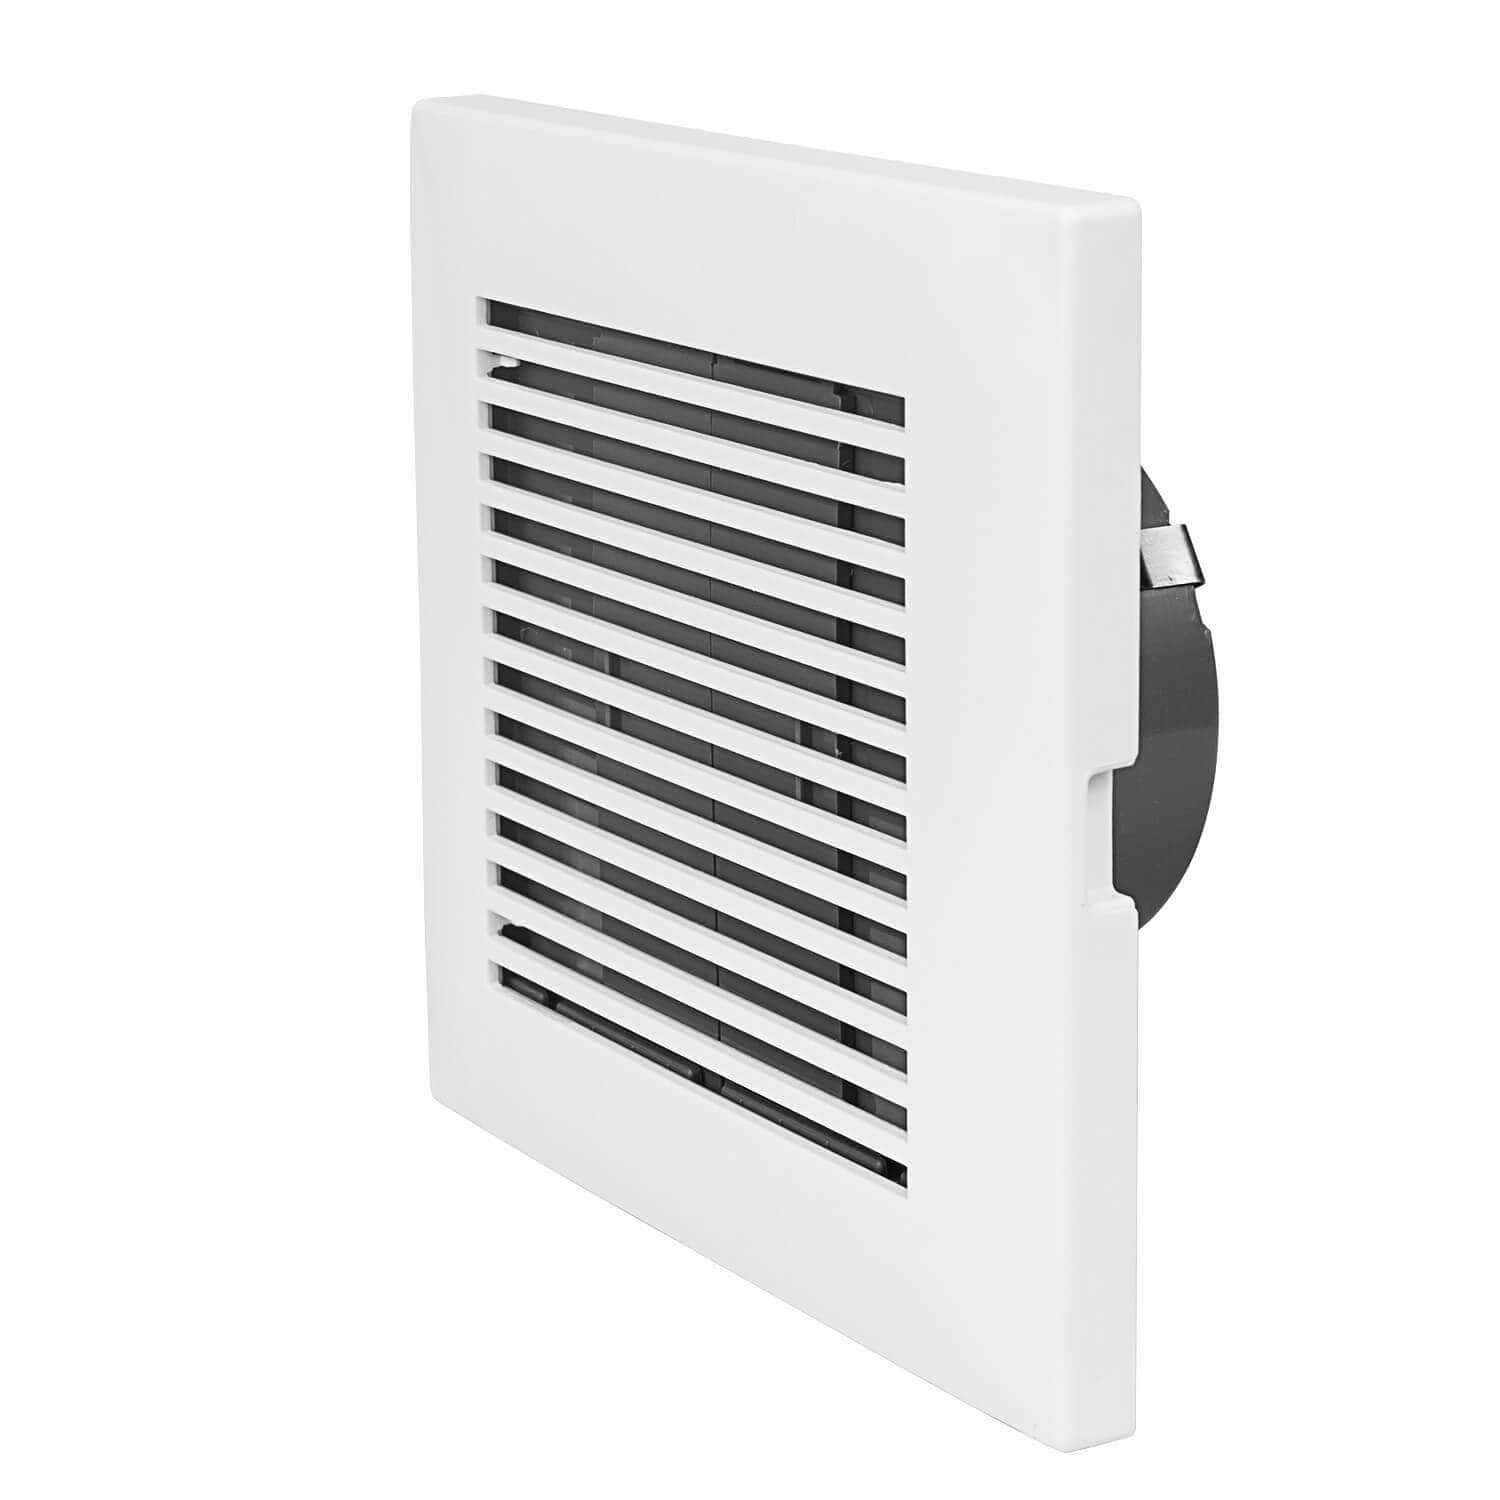 Square Air Vent HVAC Grill Ceiling Bathroom Kitchen Exhaust Fan Cover ...